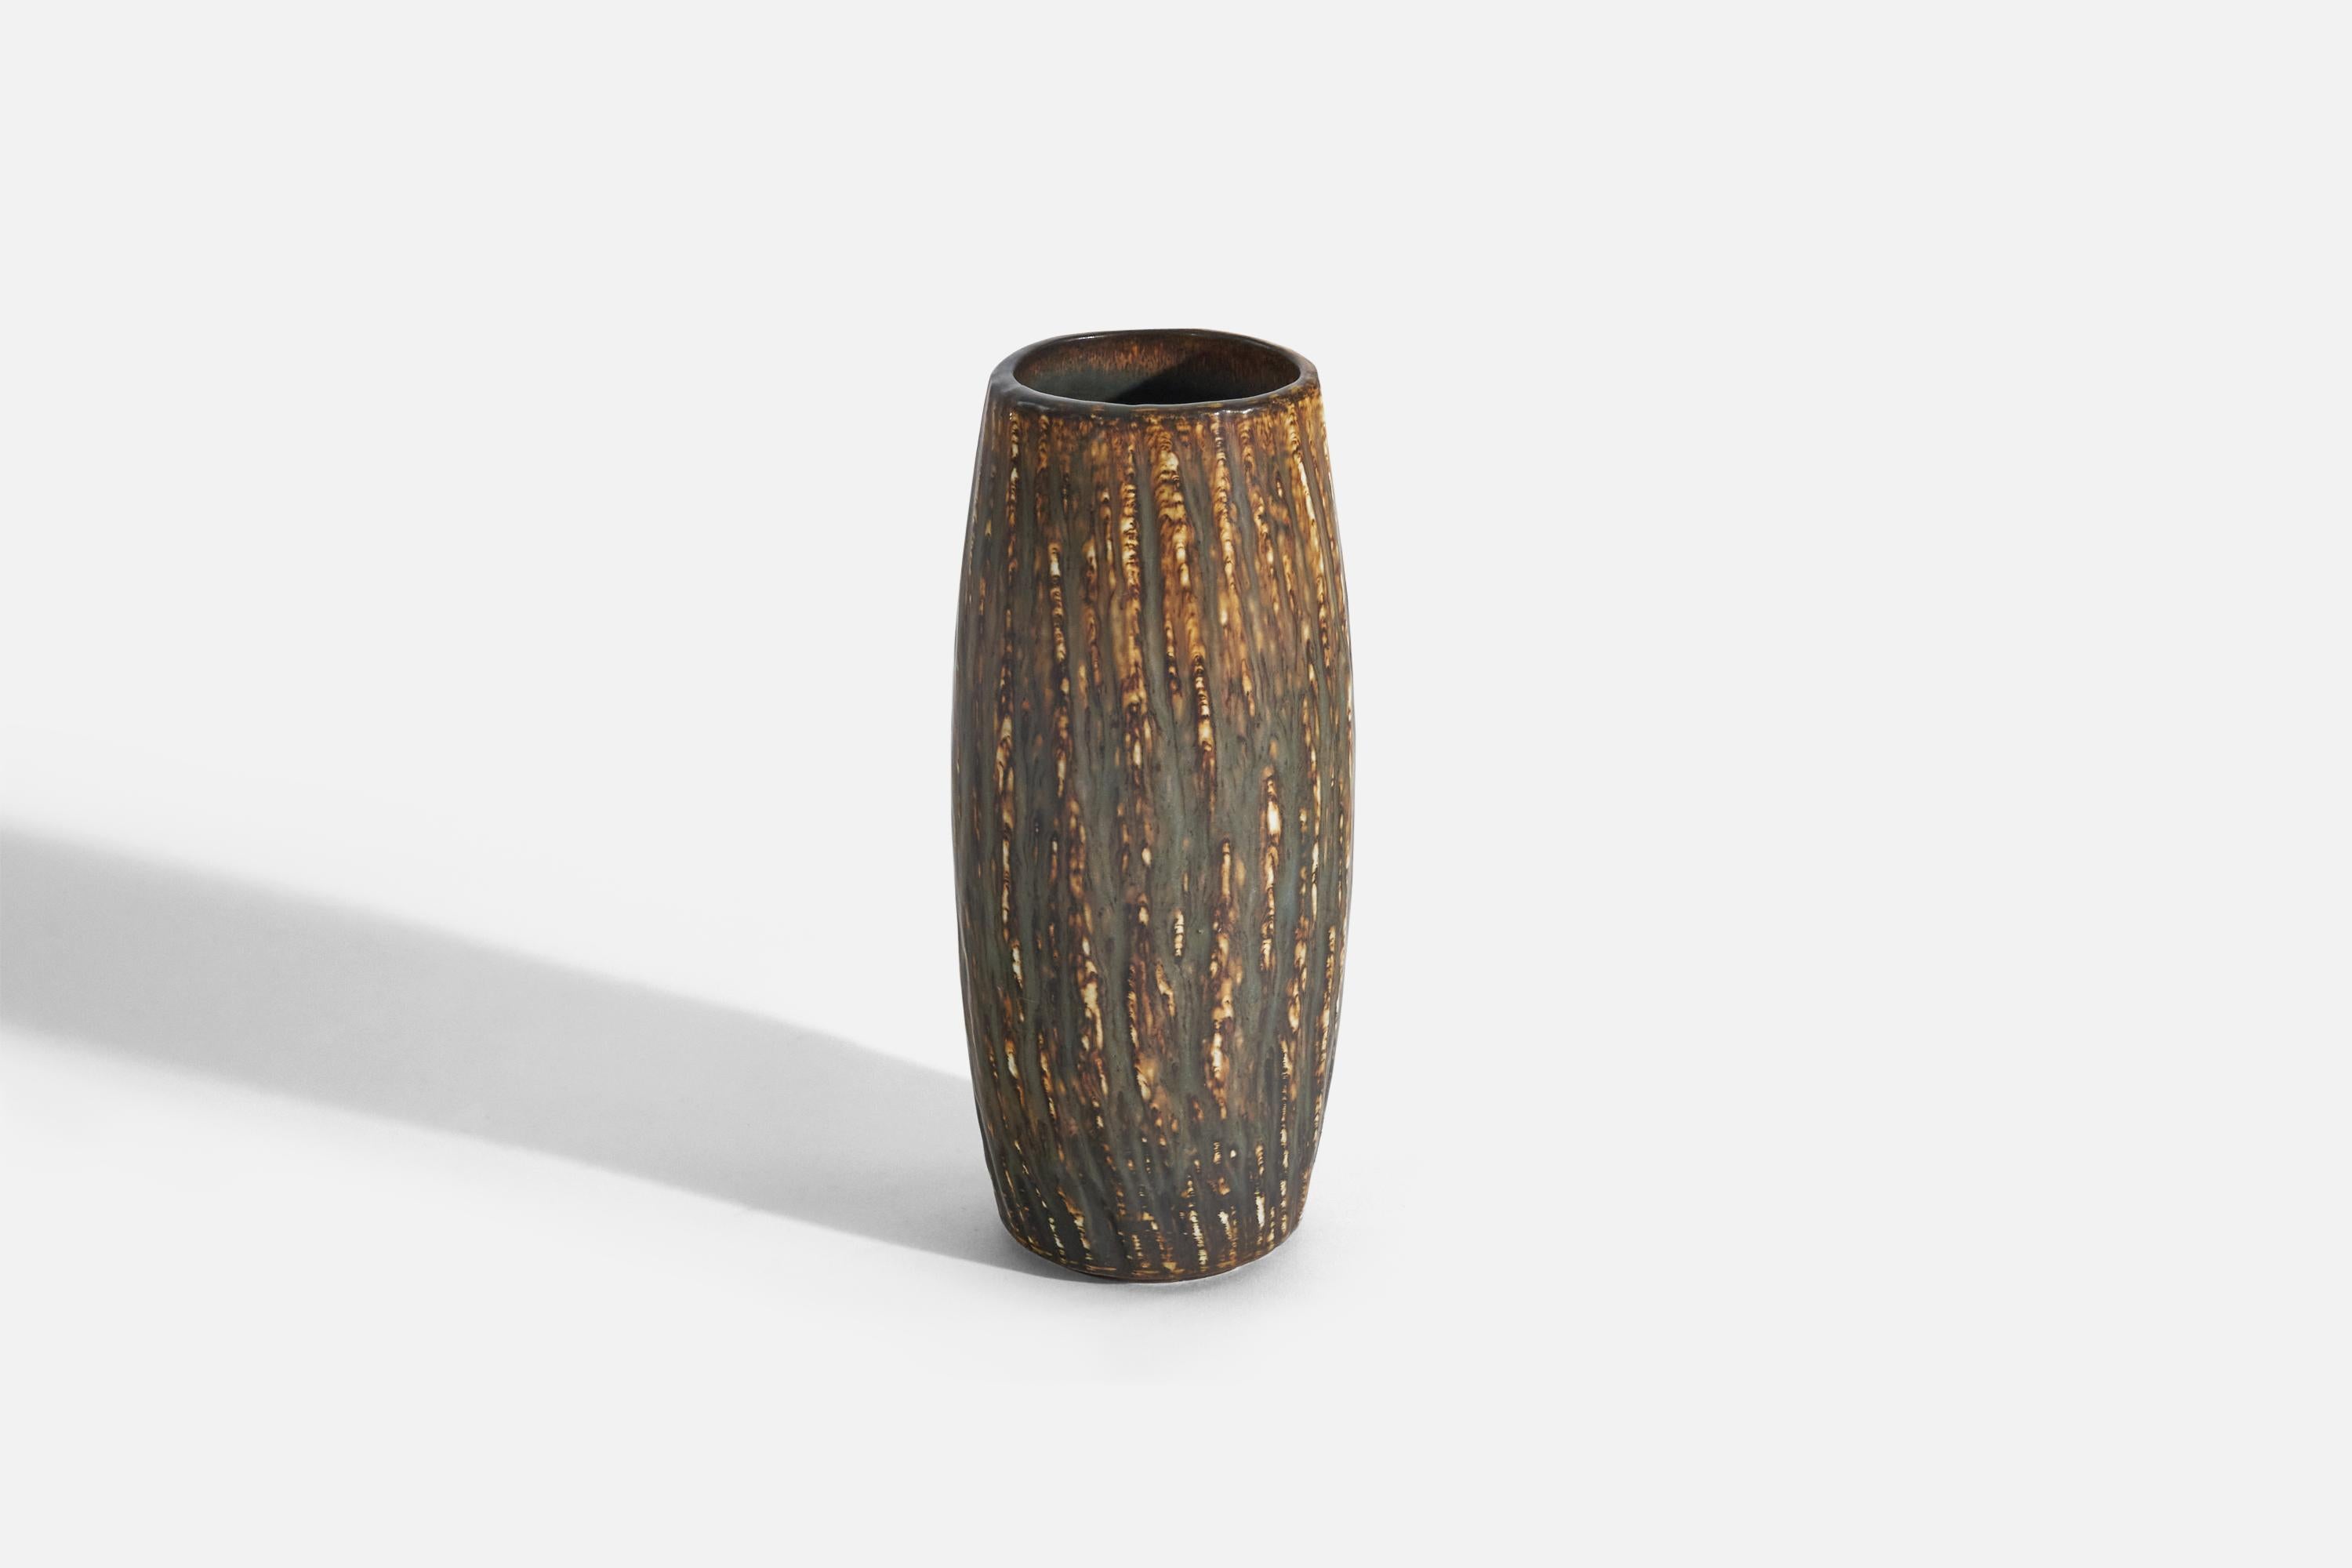 A brown and yellow-glazed stoneware vase designed by Gunnar Nylund and produced by Rörstrand, Sweden, 1950s.